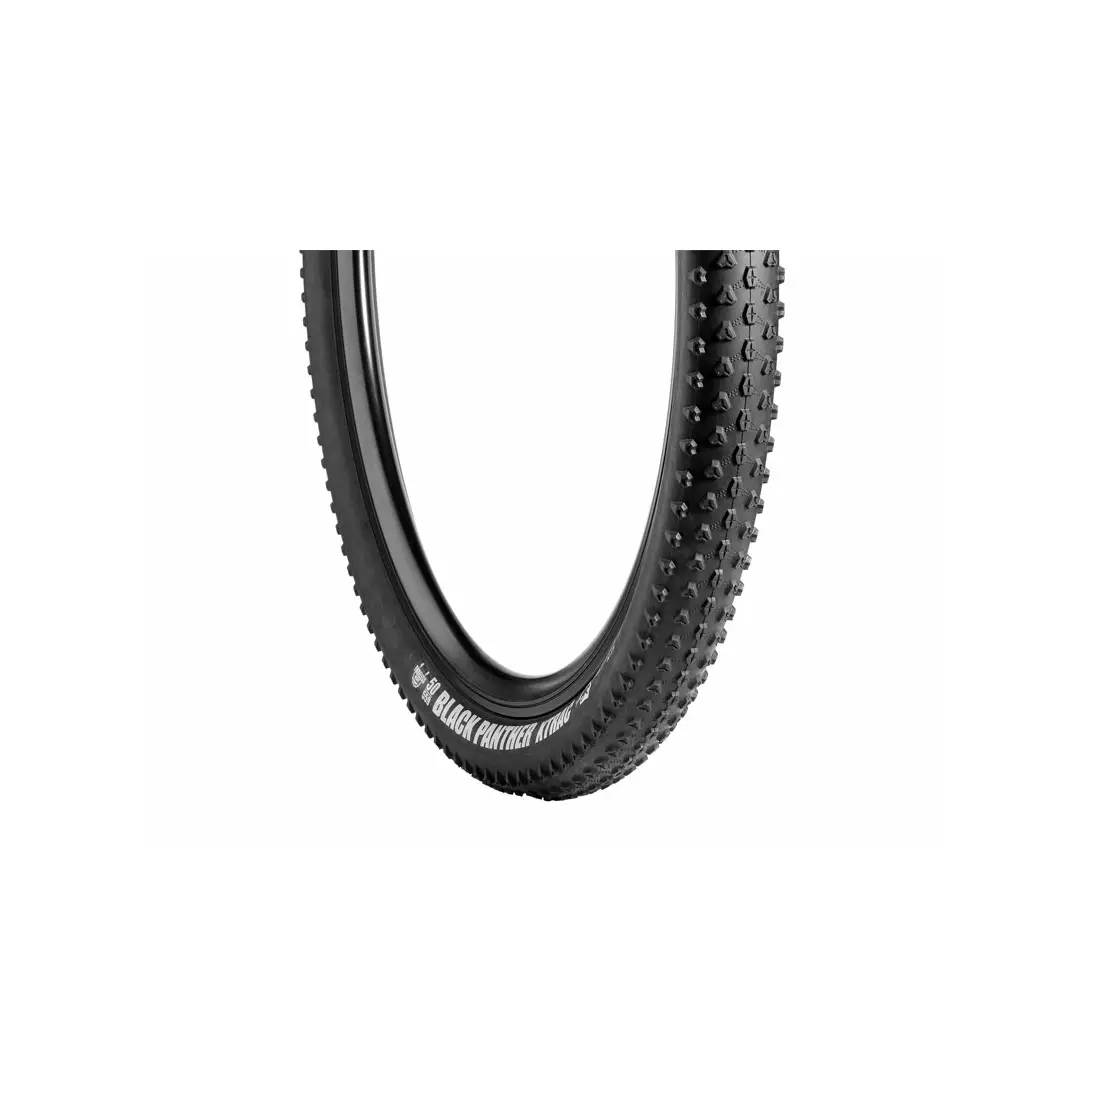 VREDESTEIN BLACK PANTHER XTRAC Mtb bicycle tyre 29x2.20 (55-622) TUBELESS READY TPI120 625g black VRD-29210